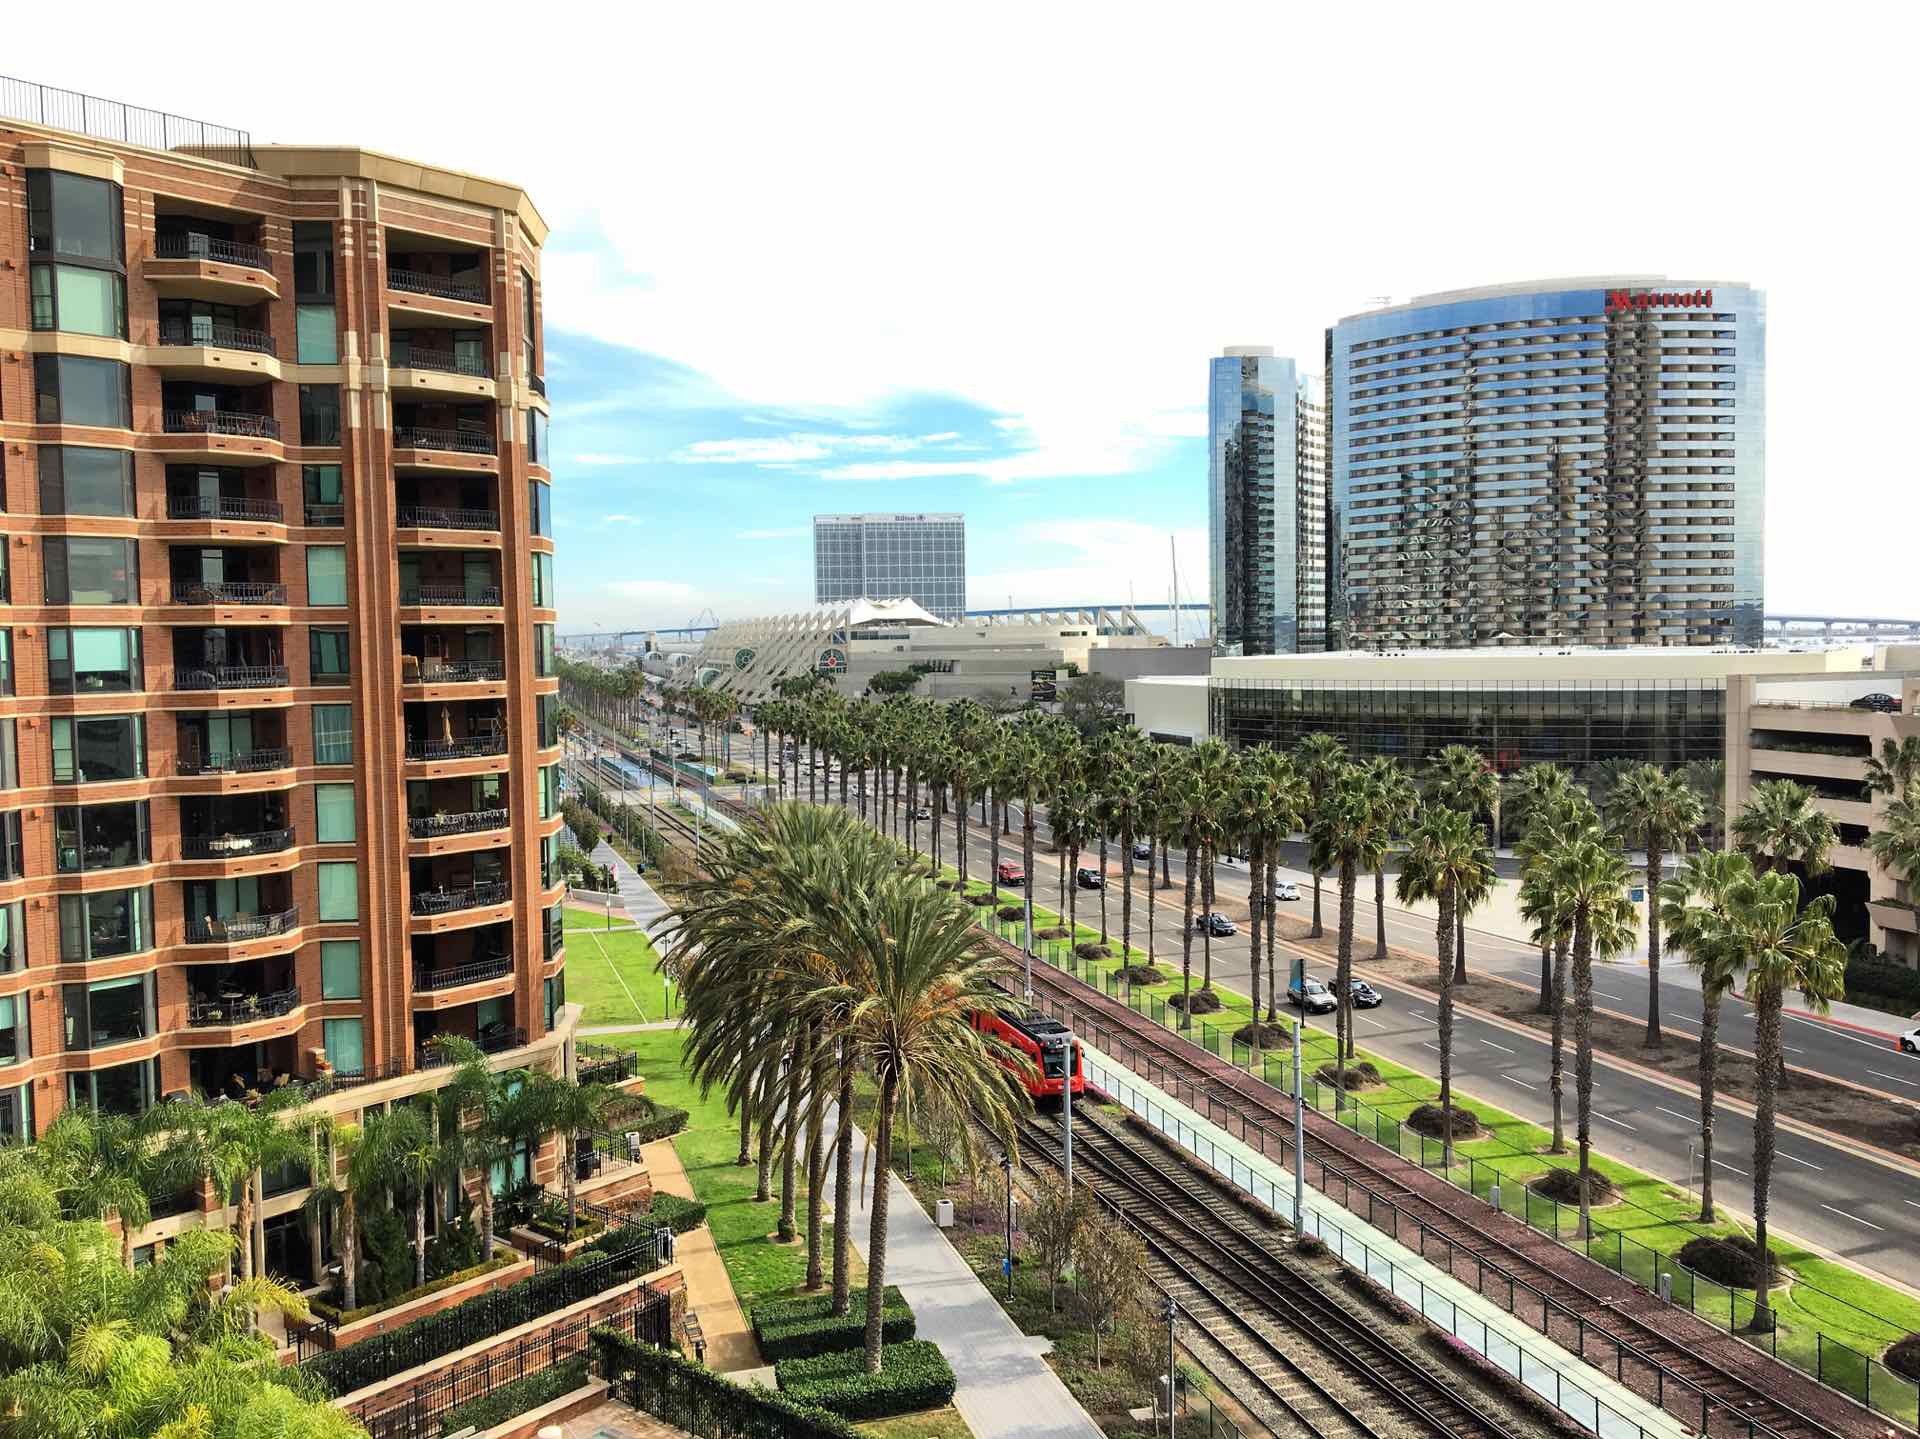 Views towards the San Diego convention center from Cityfront Terrace building